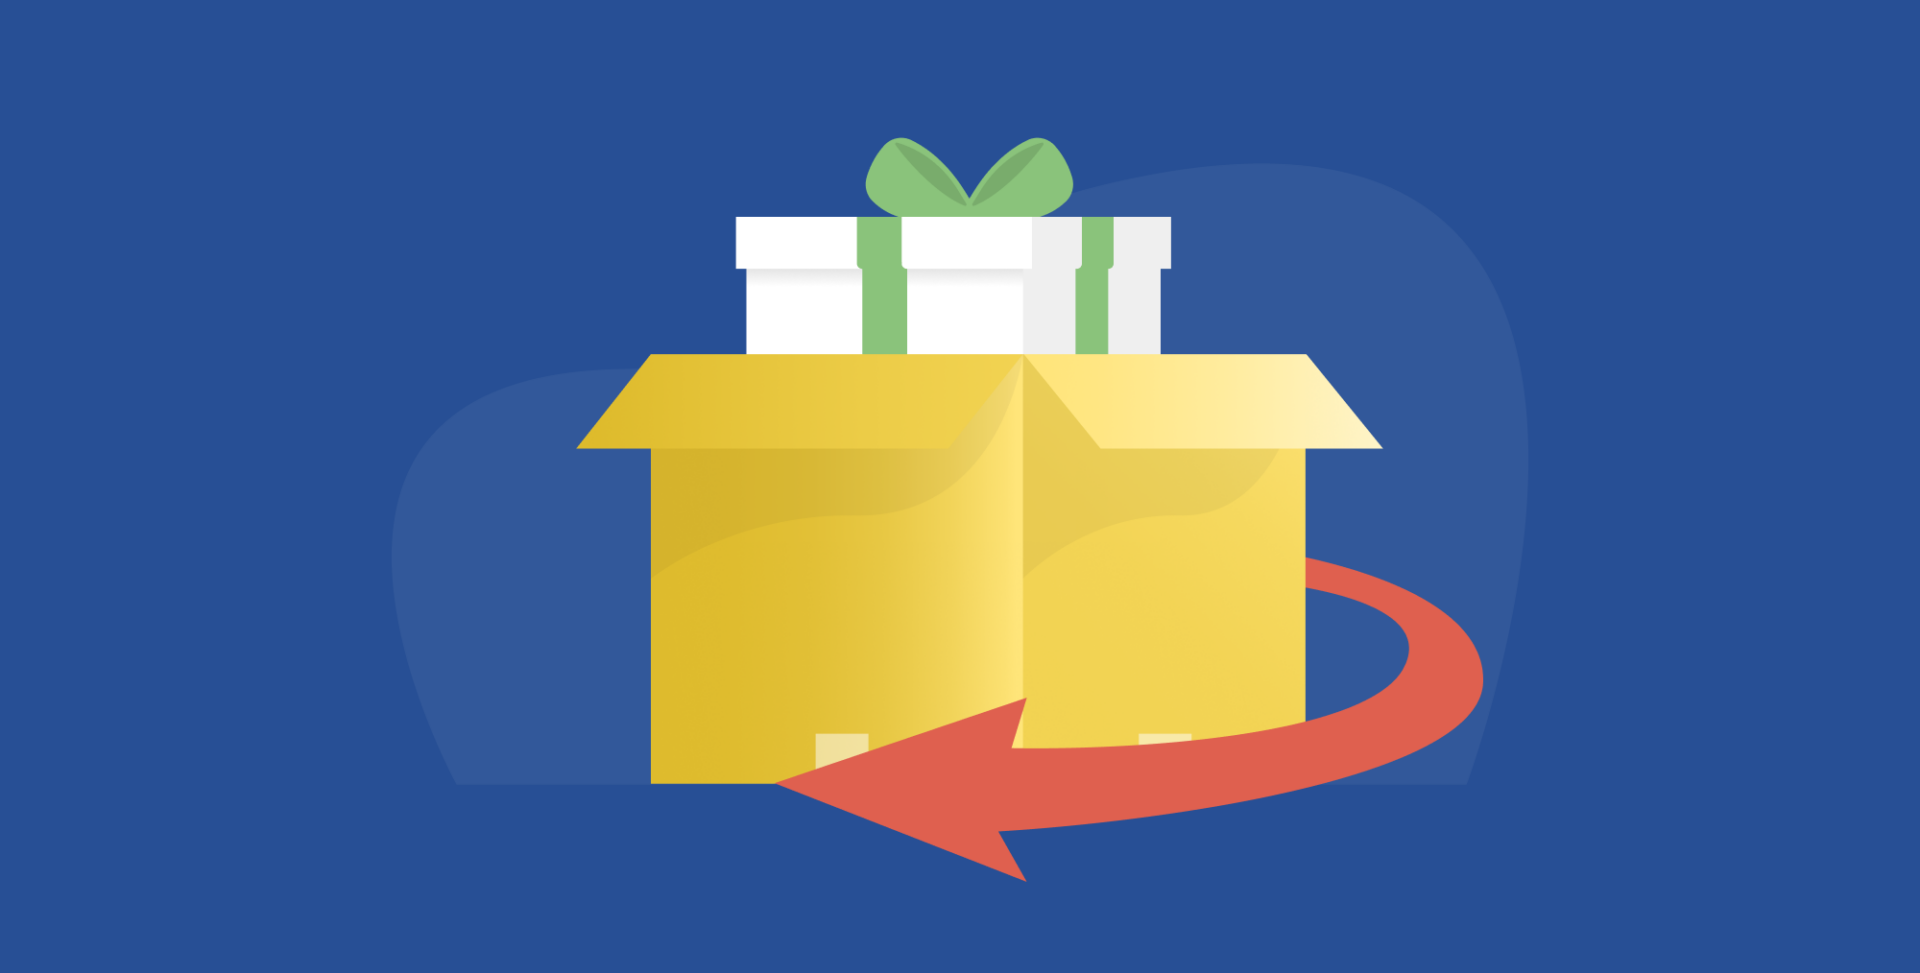 A yellow shipping box is open with a white and green present inside and a red arrow wrapped around to represent returns.